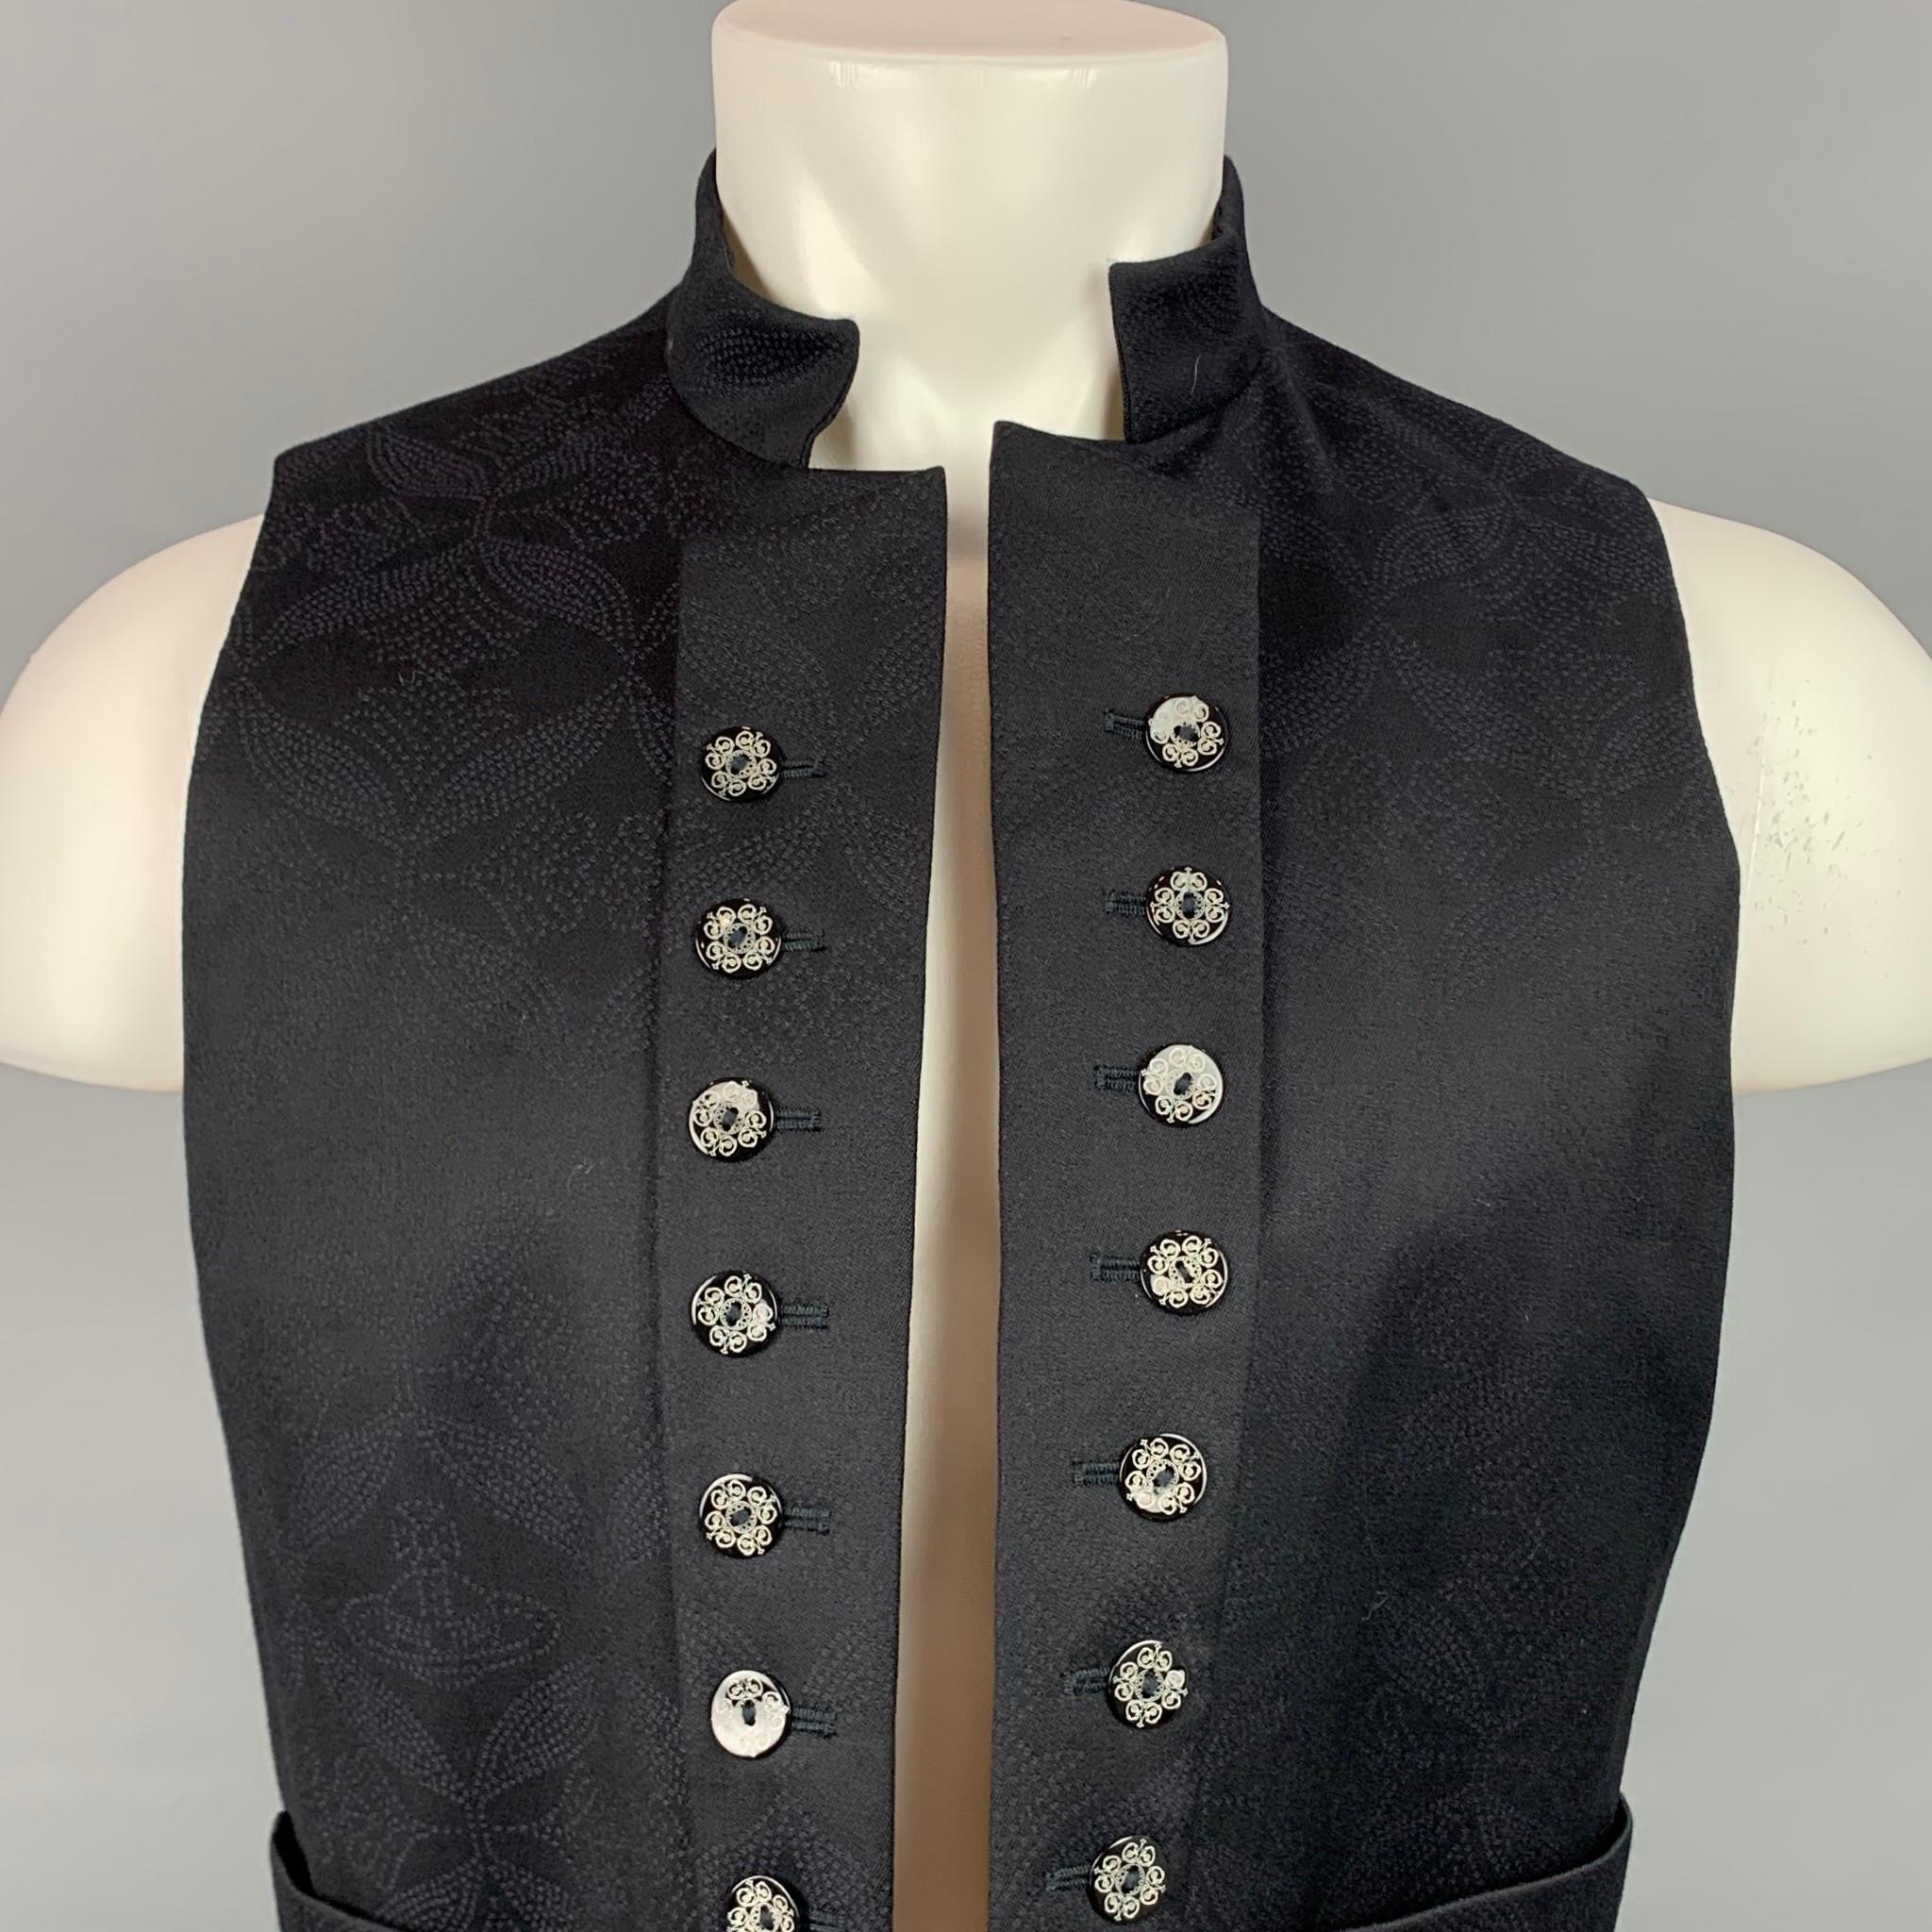 VIVIENNE WESTWOOD MAN vest comes in a black print wool with a full liner featuring buttoned details, slit pockets, and a open front. Made in Italy.

Excellent Pre-Owned Condition.
Marked: IT 50 / 2014

Measurements:

Shoulder: 14.5 in.
Chest: 38